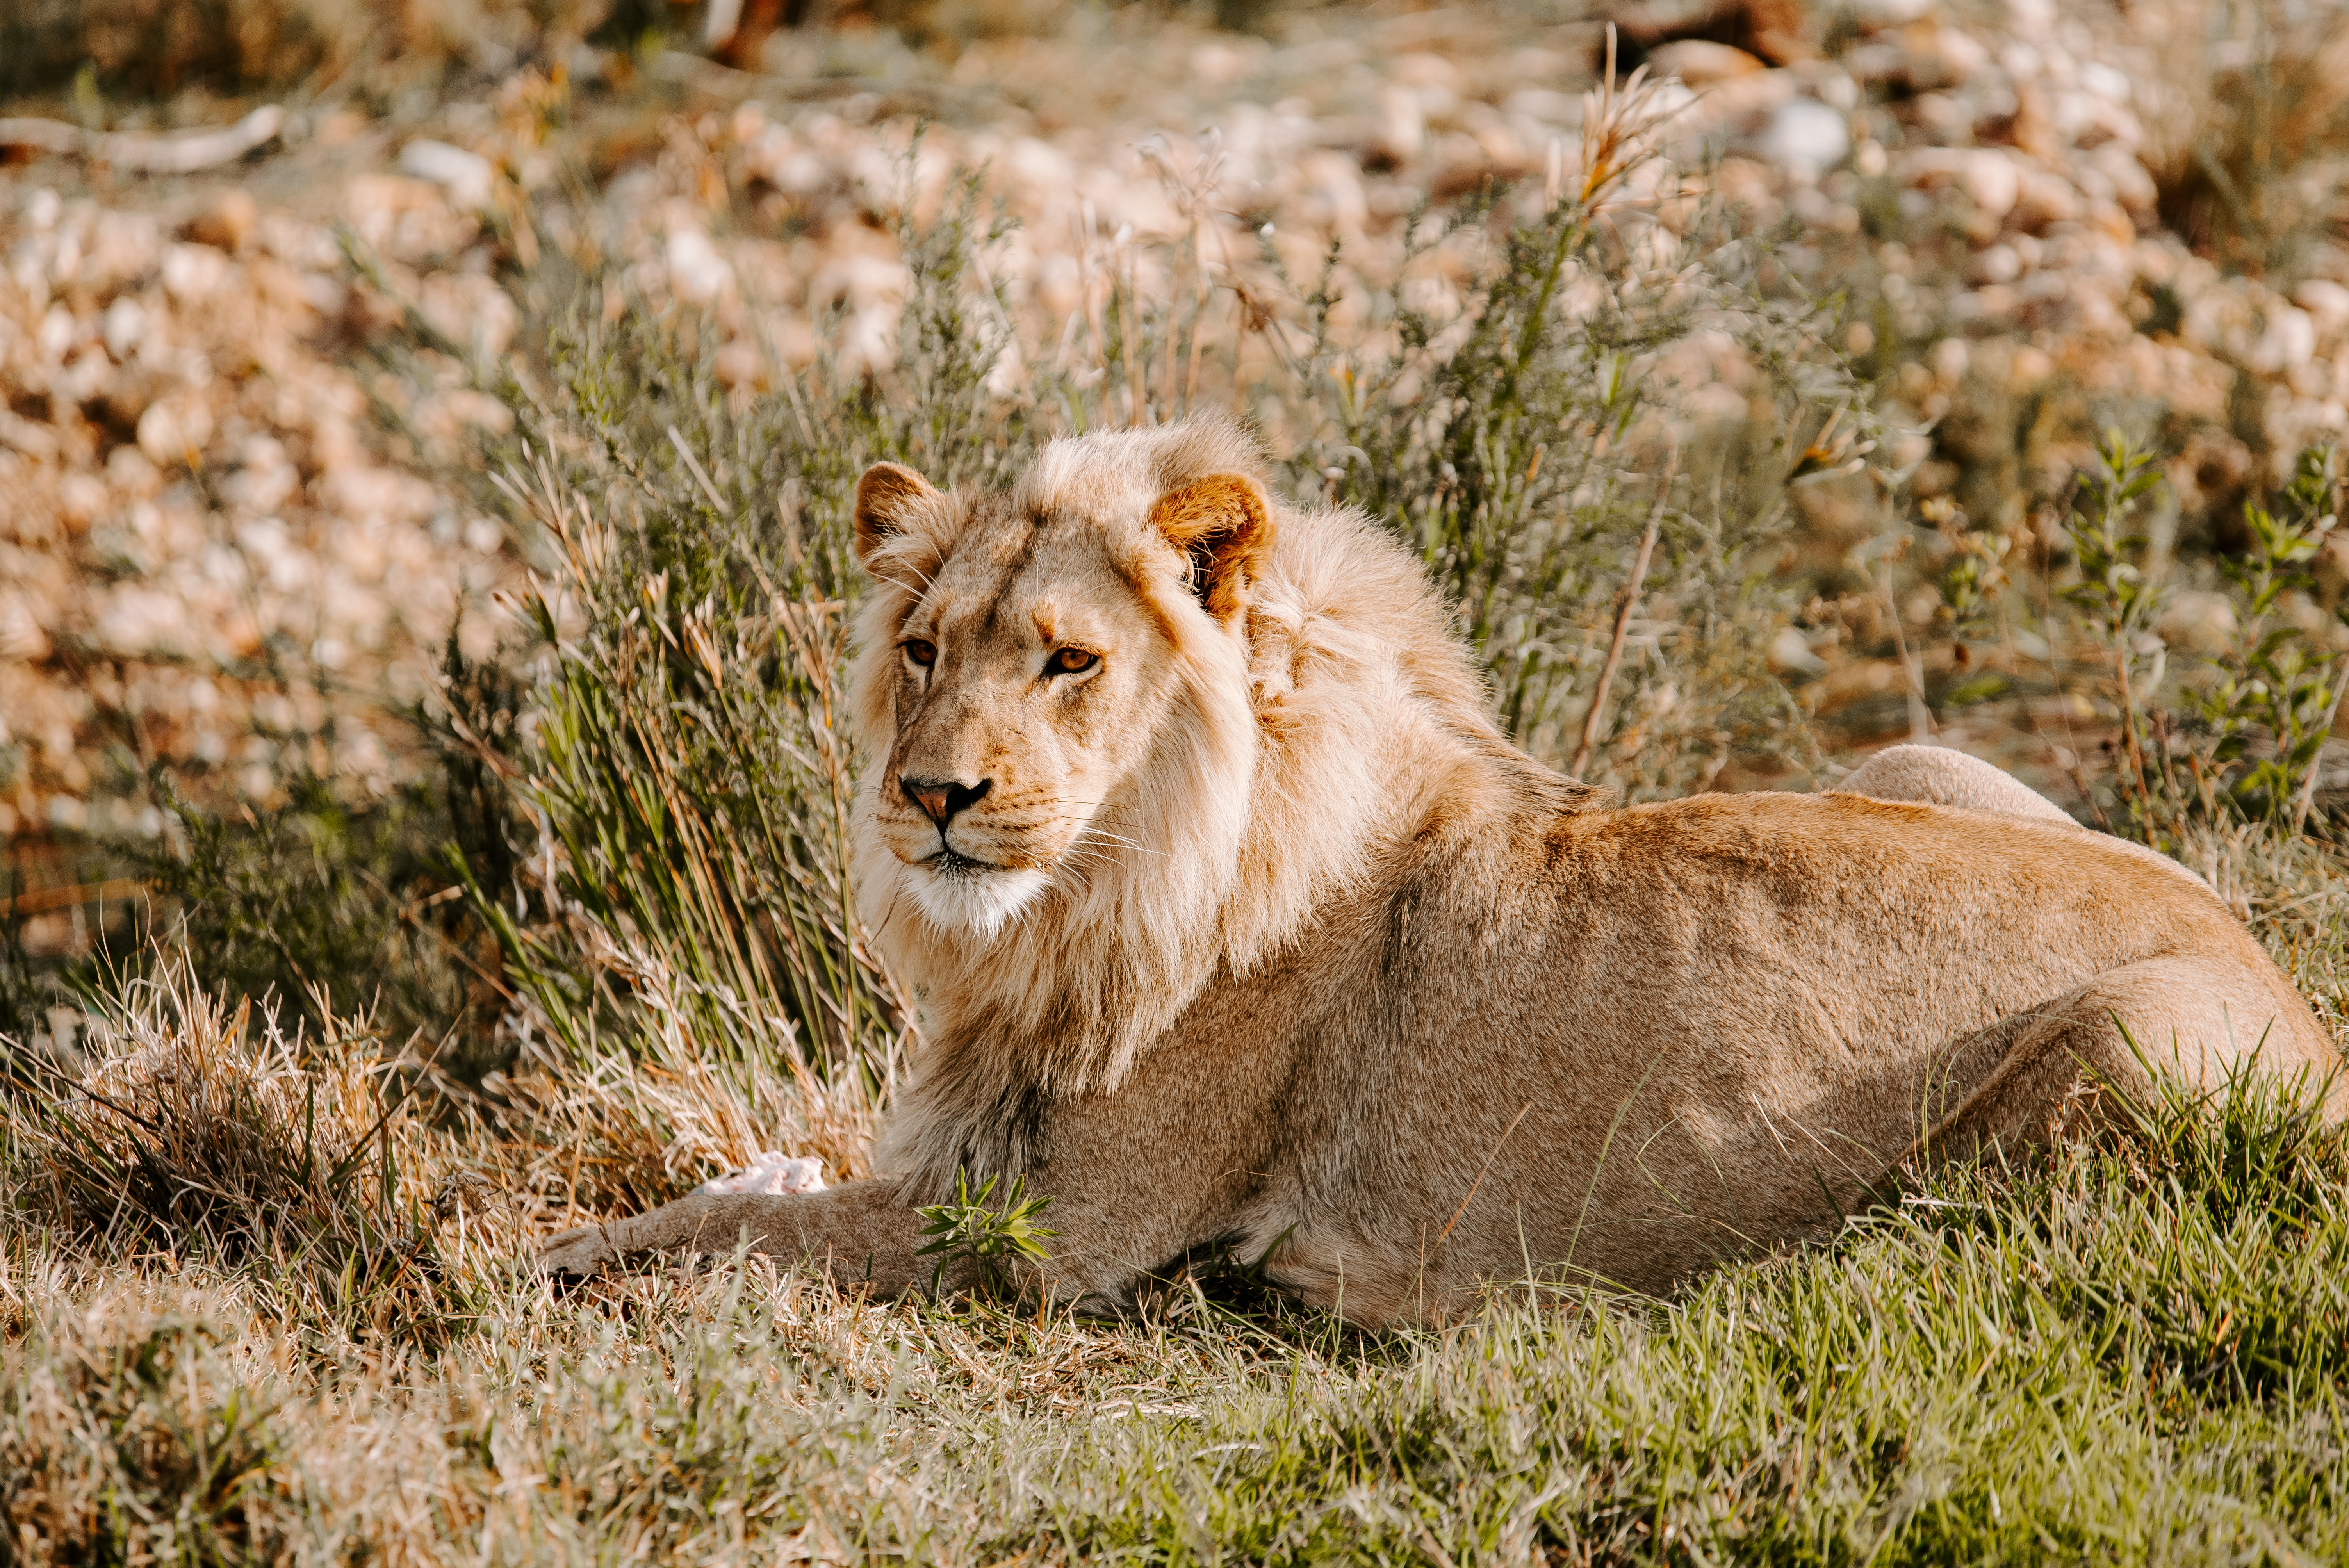 The Asiatic Lion - Sodha Travel